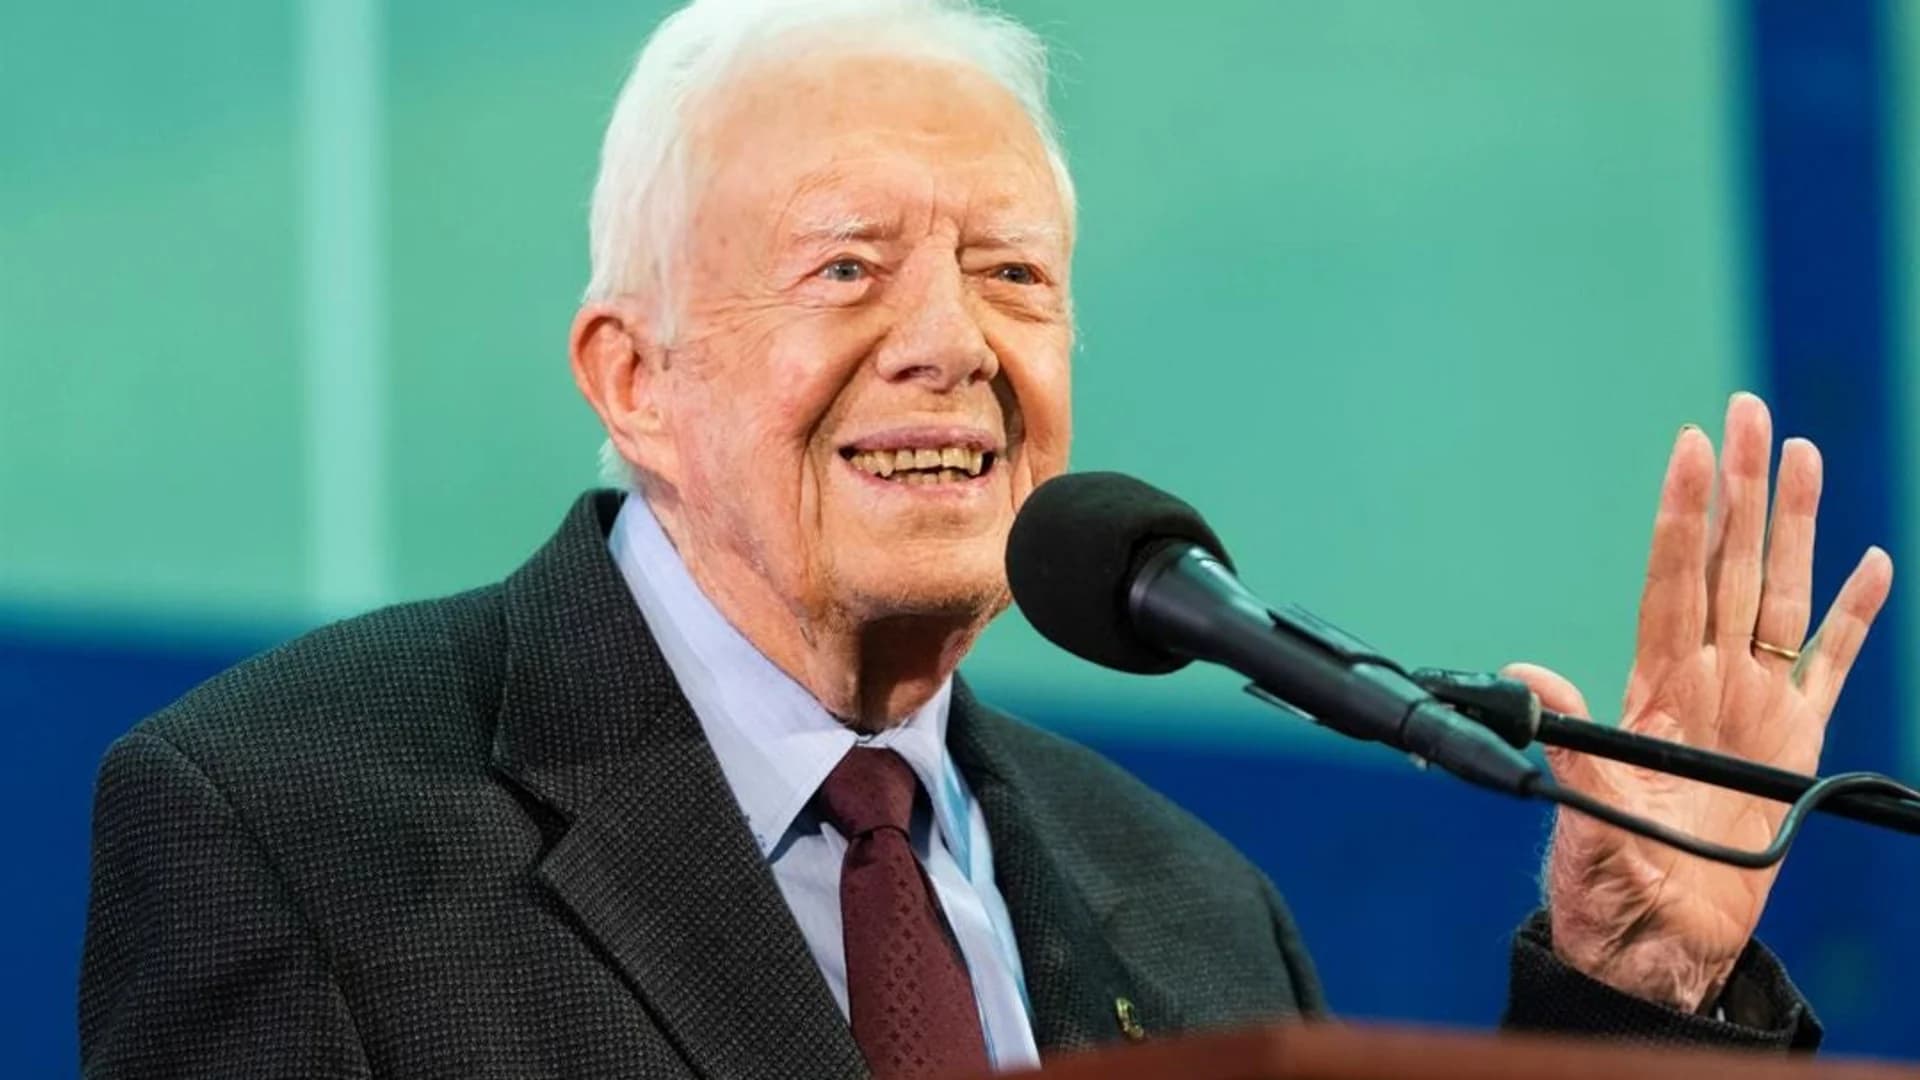 Former President Carter out of surgery, no complications